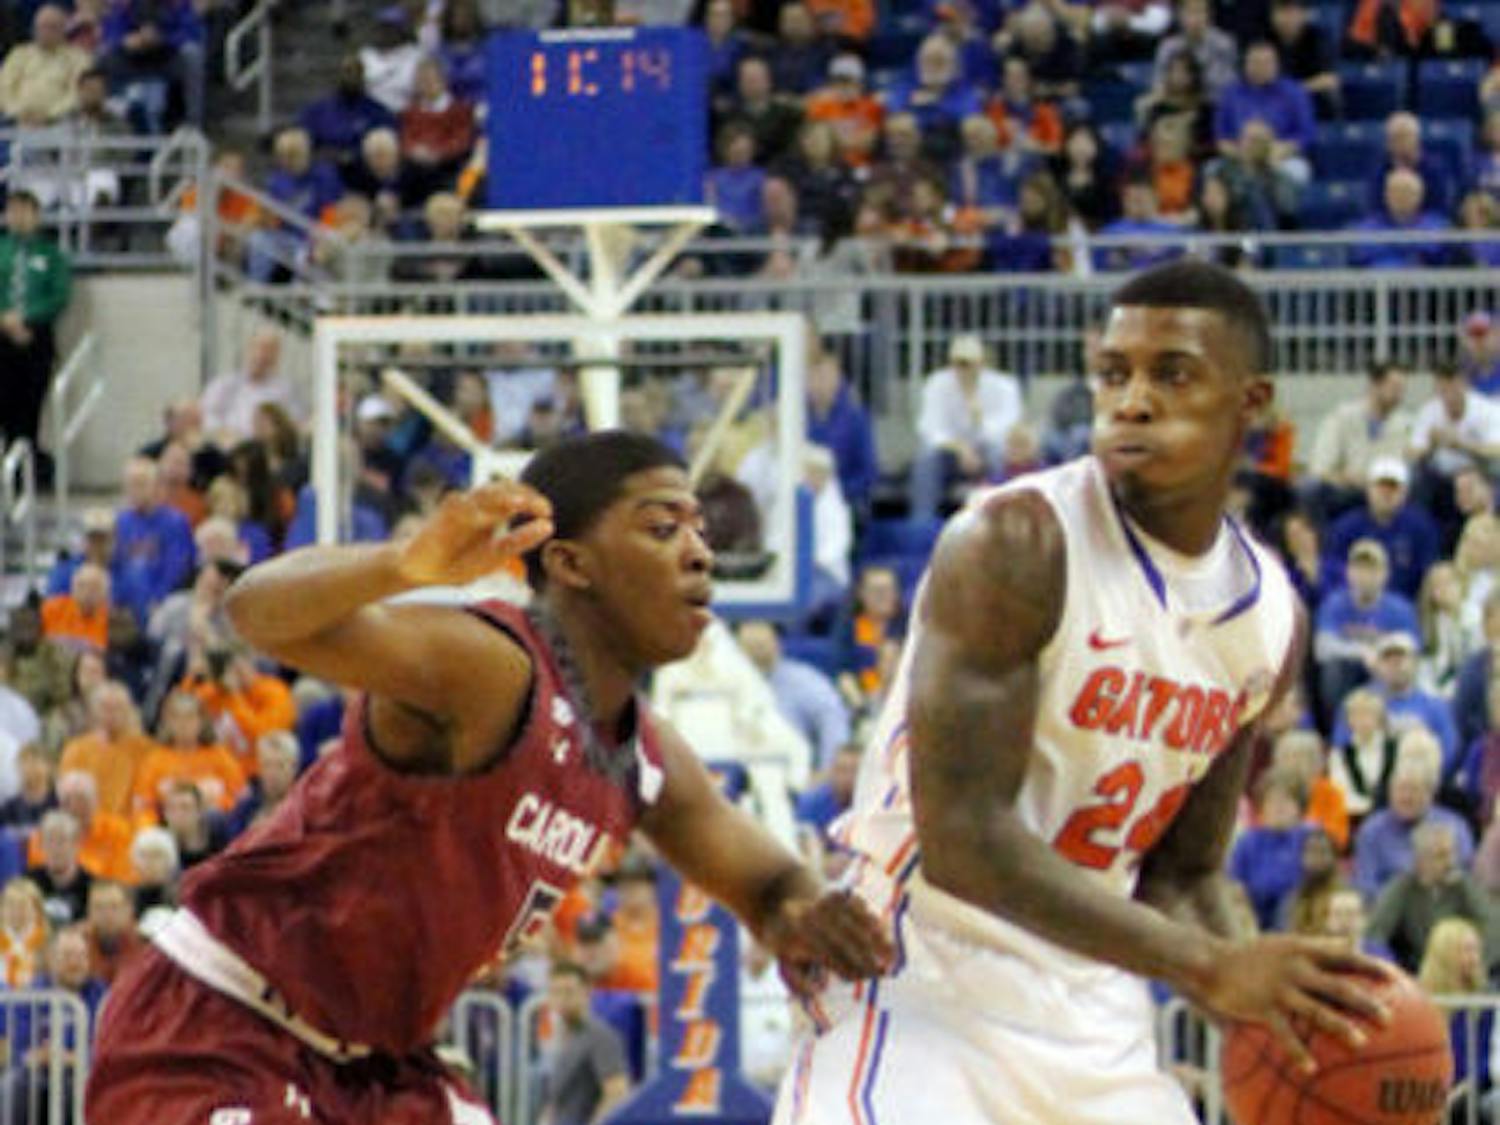 UF’s Casey Prather looks to pass the ball during the Gators’ 74-56 win against South Carolina in the season’s SEC opener on Wednesday night. Prather is questionable for Florida’s road game against Arkansas on Saturday due to swelling in his right knee.